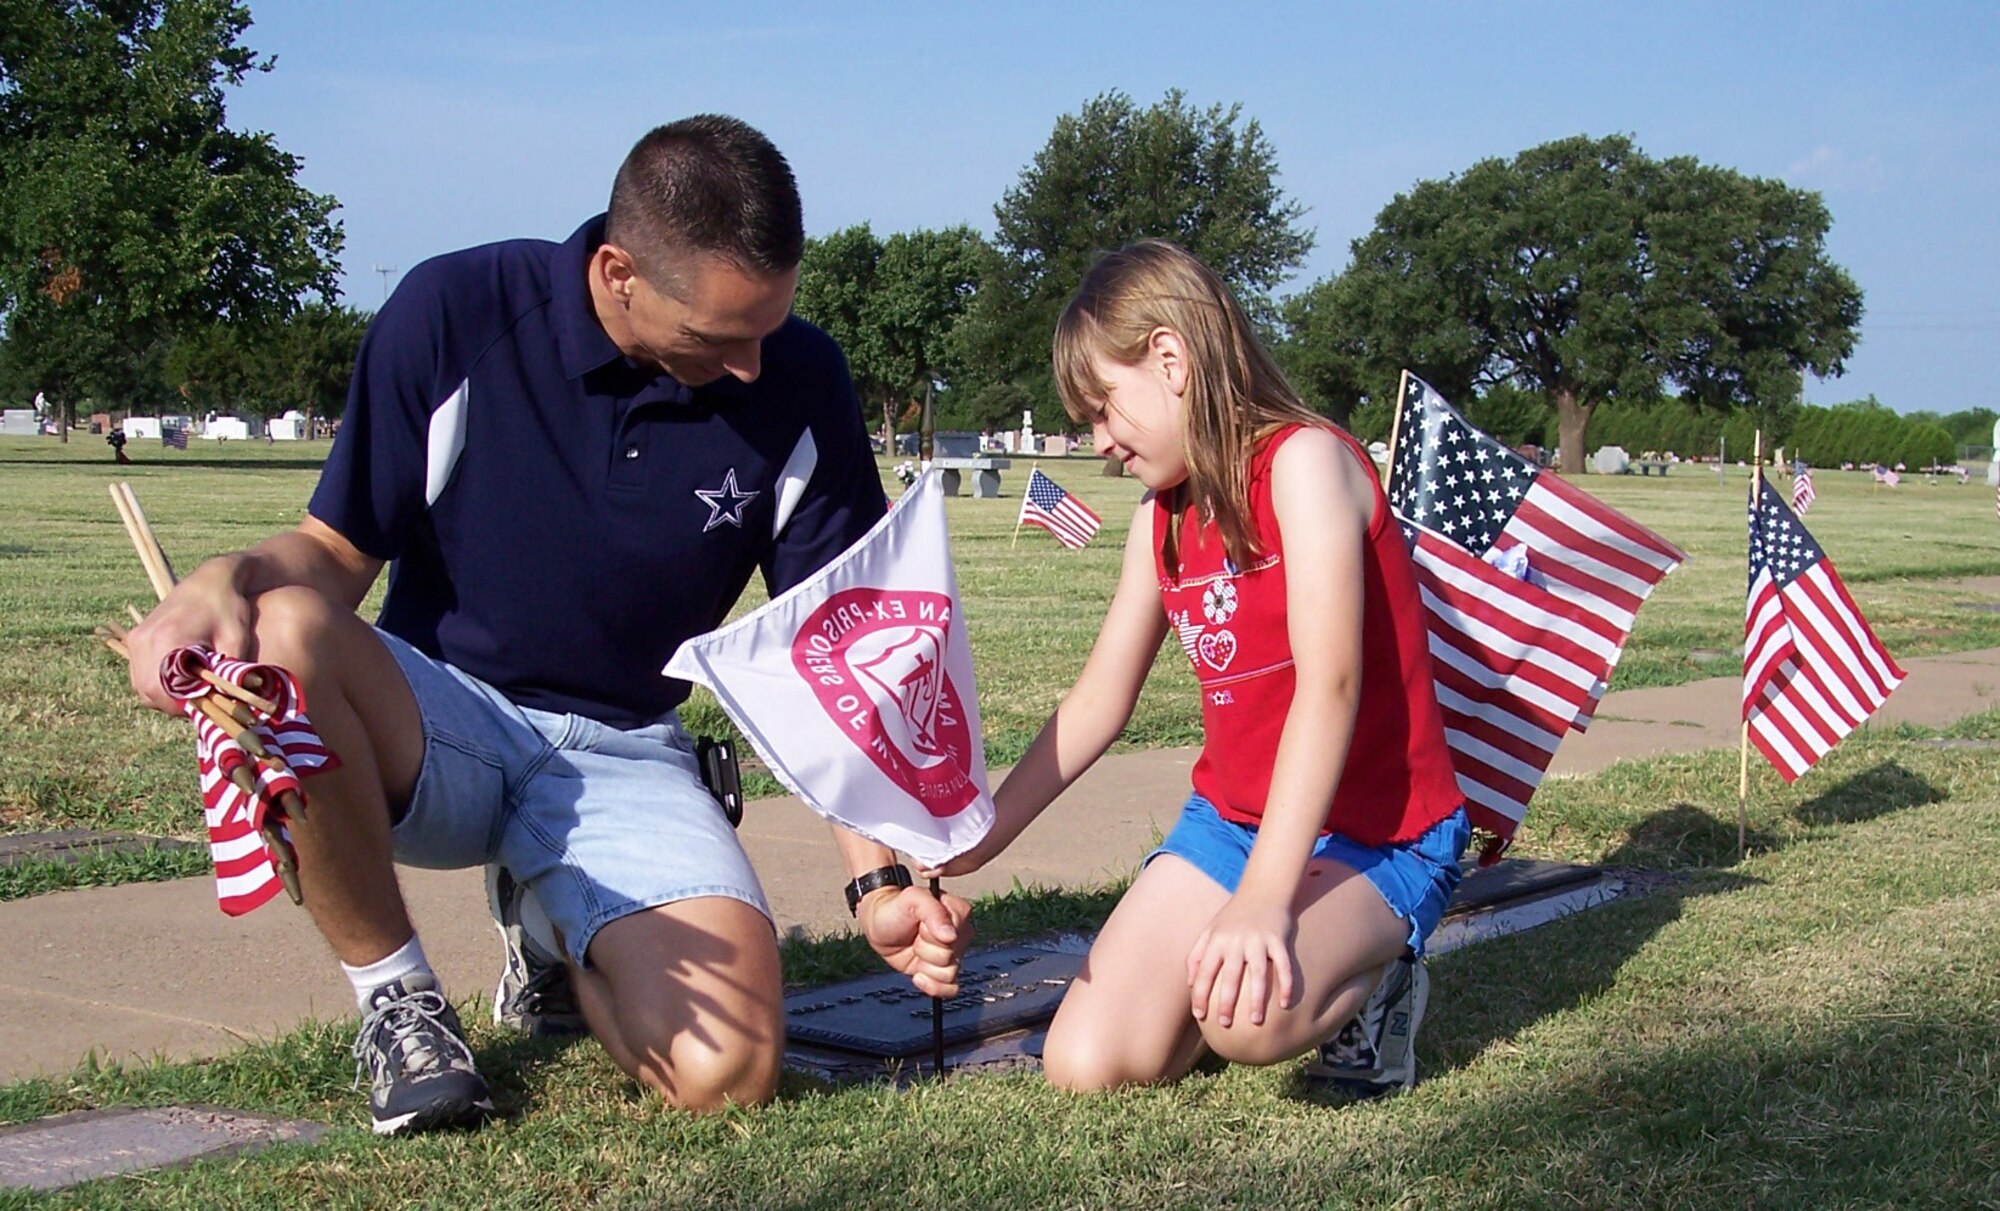 Local Chapter 1054, Air Force Sergeants Association and Sheppard personnel took part in placing American flags on the grave sites of veterans. In this particular photo, AFSA helped place 25 American Ex-Prisoners of War flags.  Master Sgt. Kenneth Boteler, an AFSA member assigned to the 361st Training Squadron, and his daughter are placing one of the 25 American Ex-Prisoners of War flags. The groups place more than 3,000 American flags and 25 American Ex-Prisoners of War Flags. (U.S. Air Force photo).